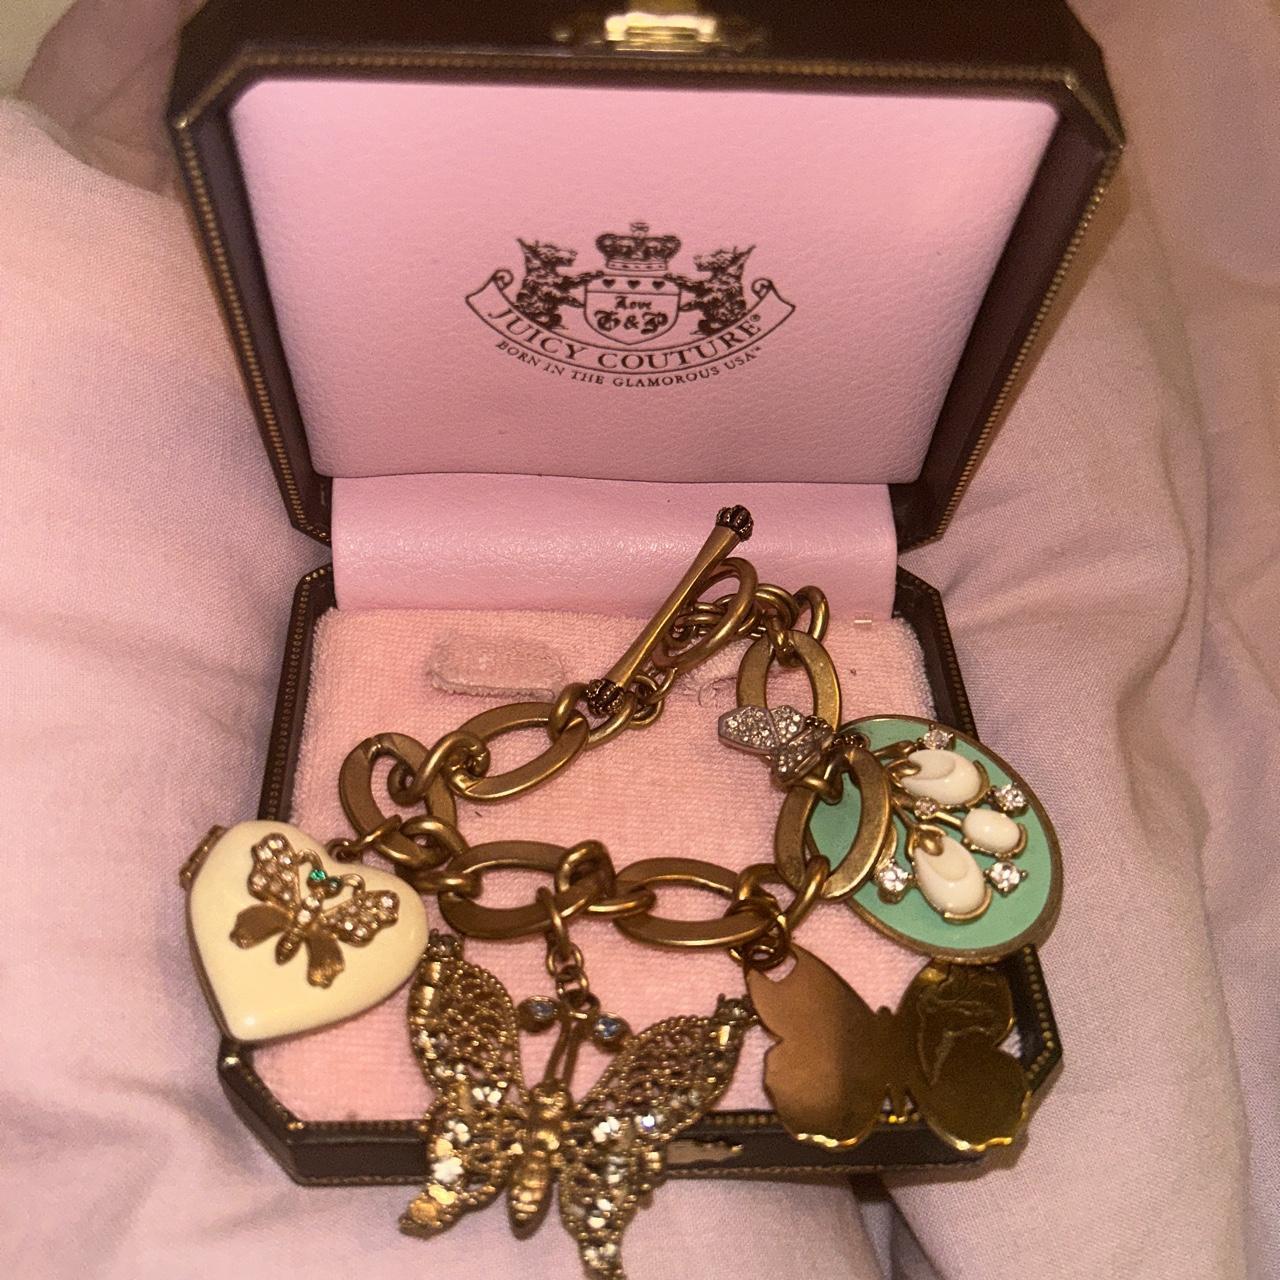 Juicy Couture charm bracelet featuring a crystal - Depop